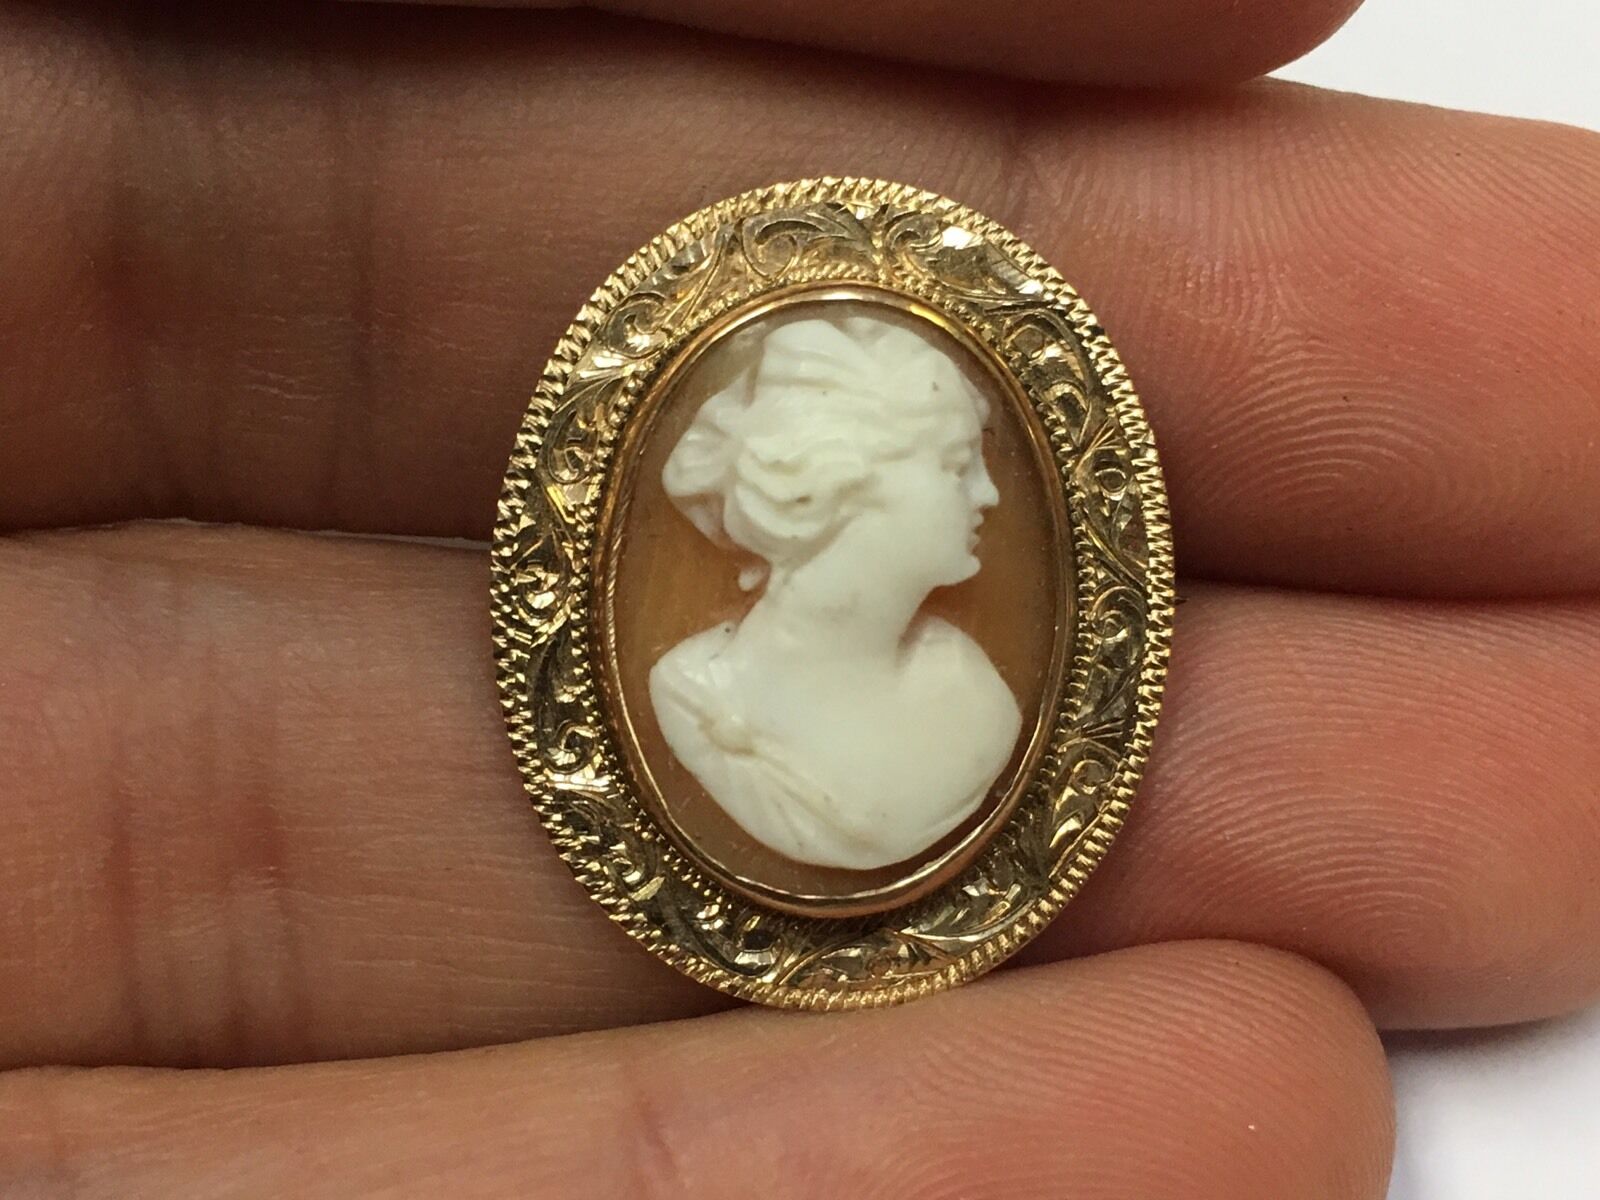 ANTIQUE 10K YELLOW GOLD FLORAL CAMEO BROOCH ORNATE DESIGN ESATE PIN LADY